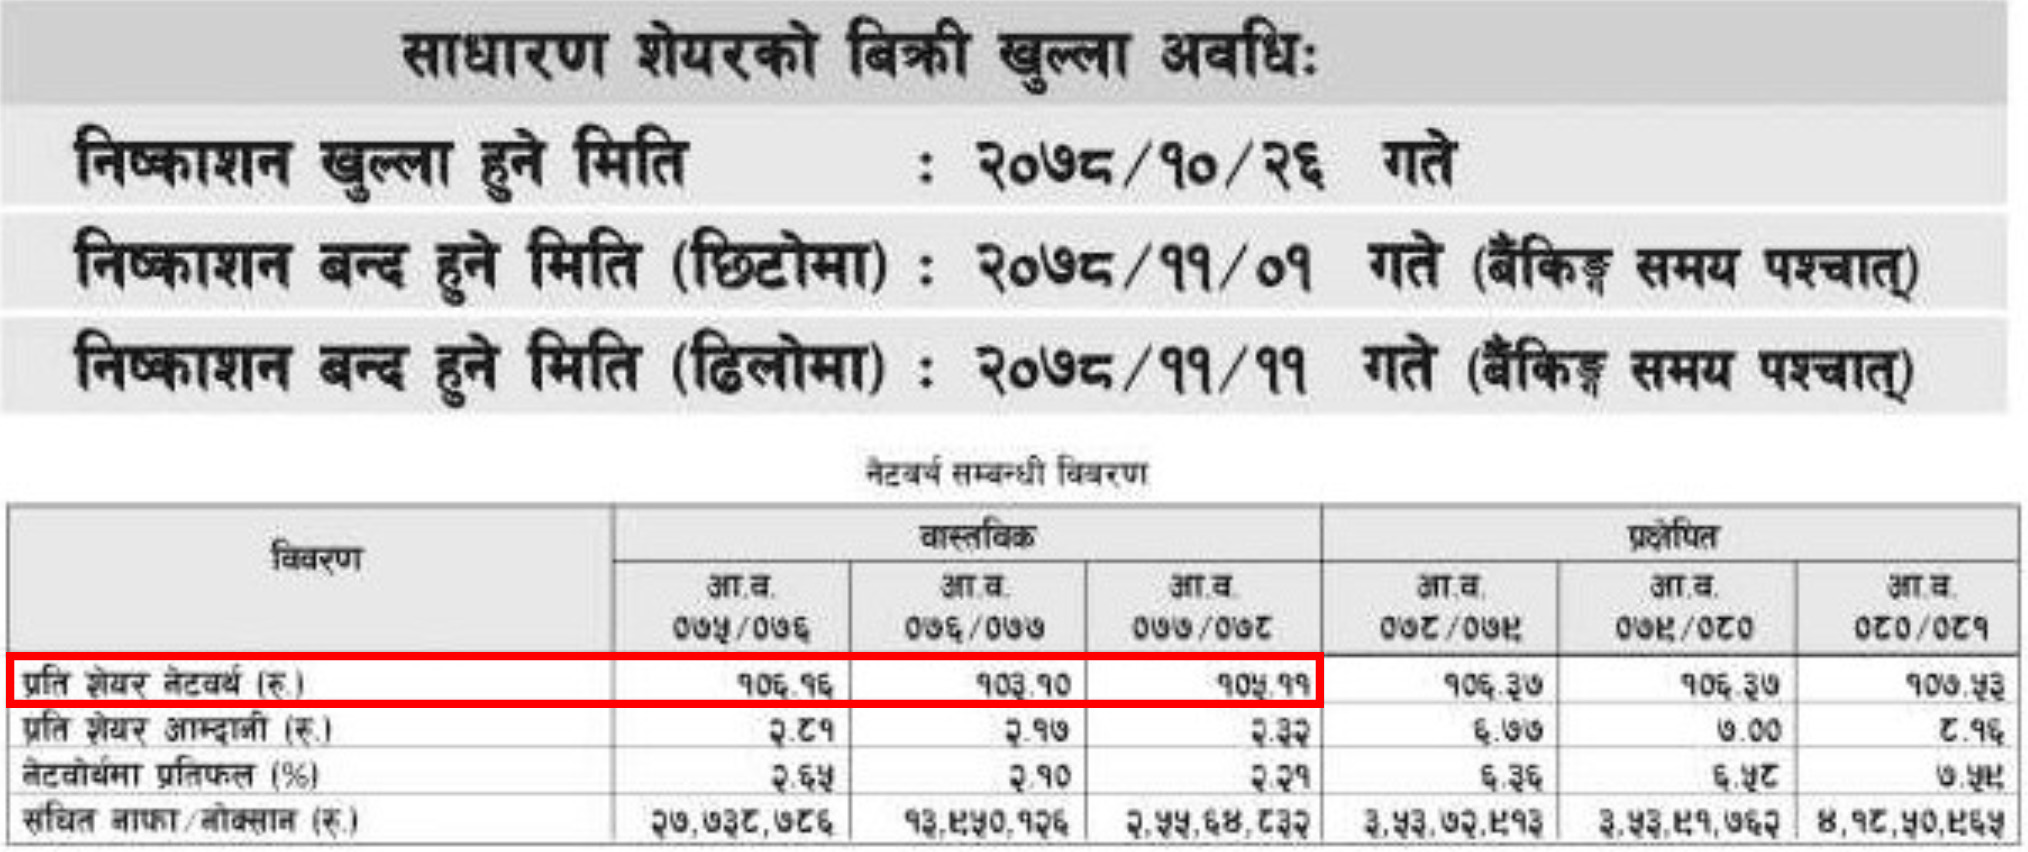 net worth per share of emerging nepal limited